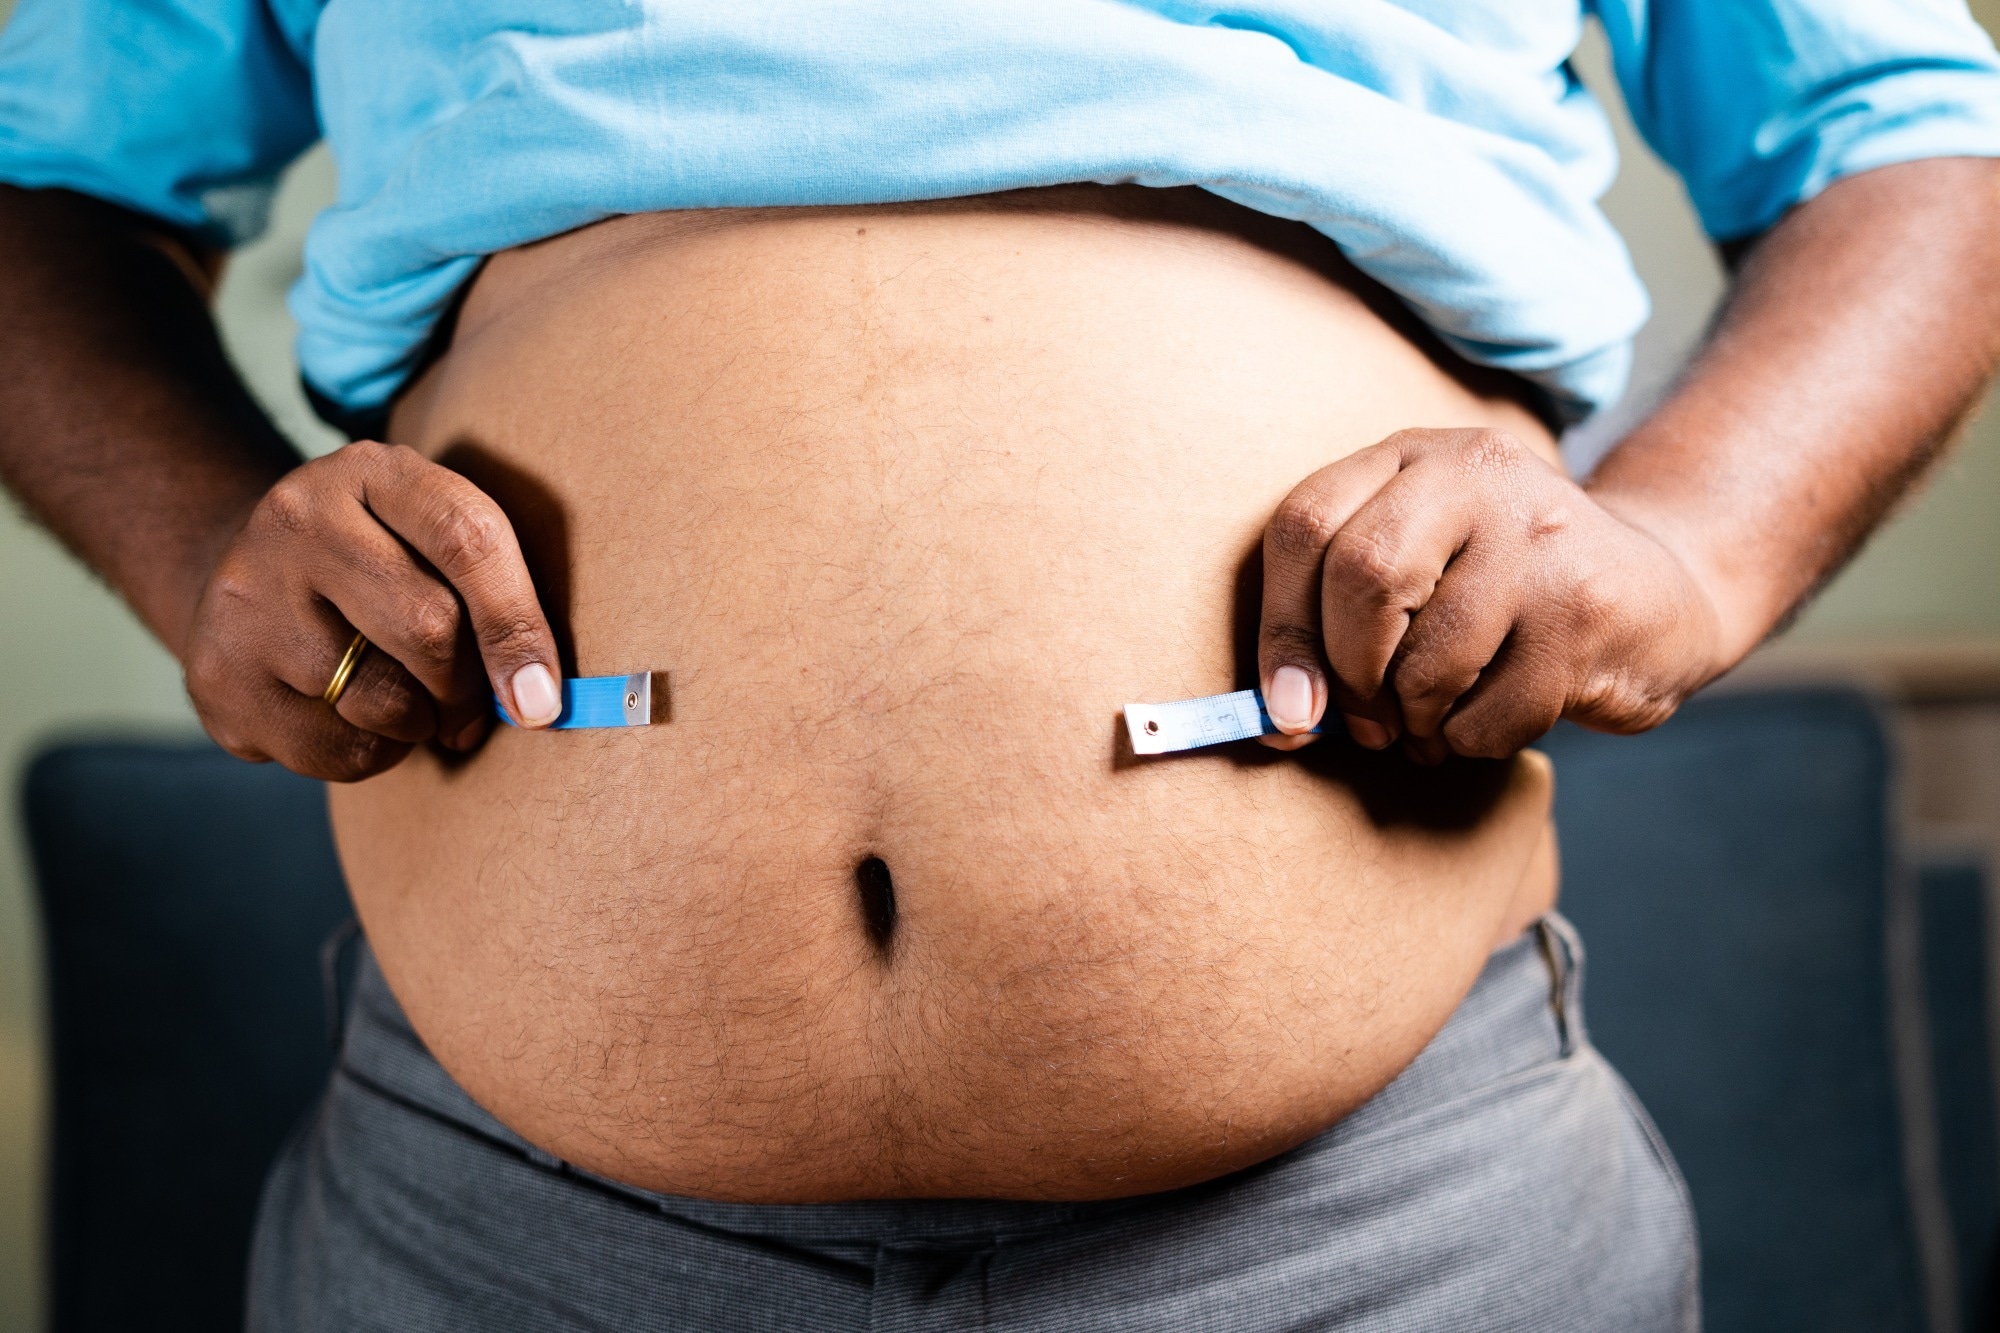 Study: Metabolic non-communicable disease health report of India: the ICMR-INDIAB national cross-sectional study (ICMR-INDIAB-17). Image Credit: WESTOCK PRODUCTIONS / Shutterstock